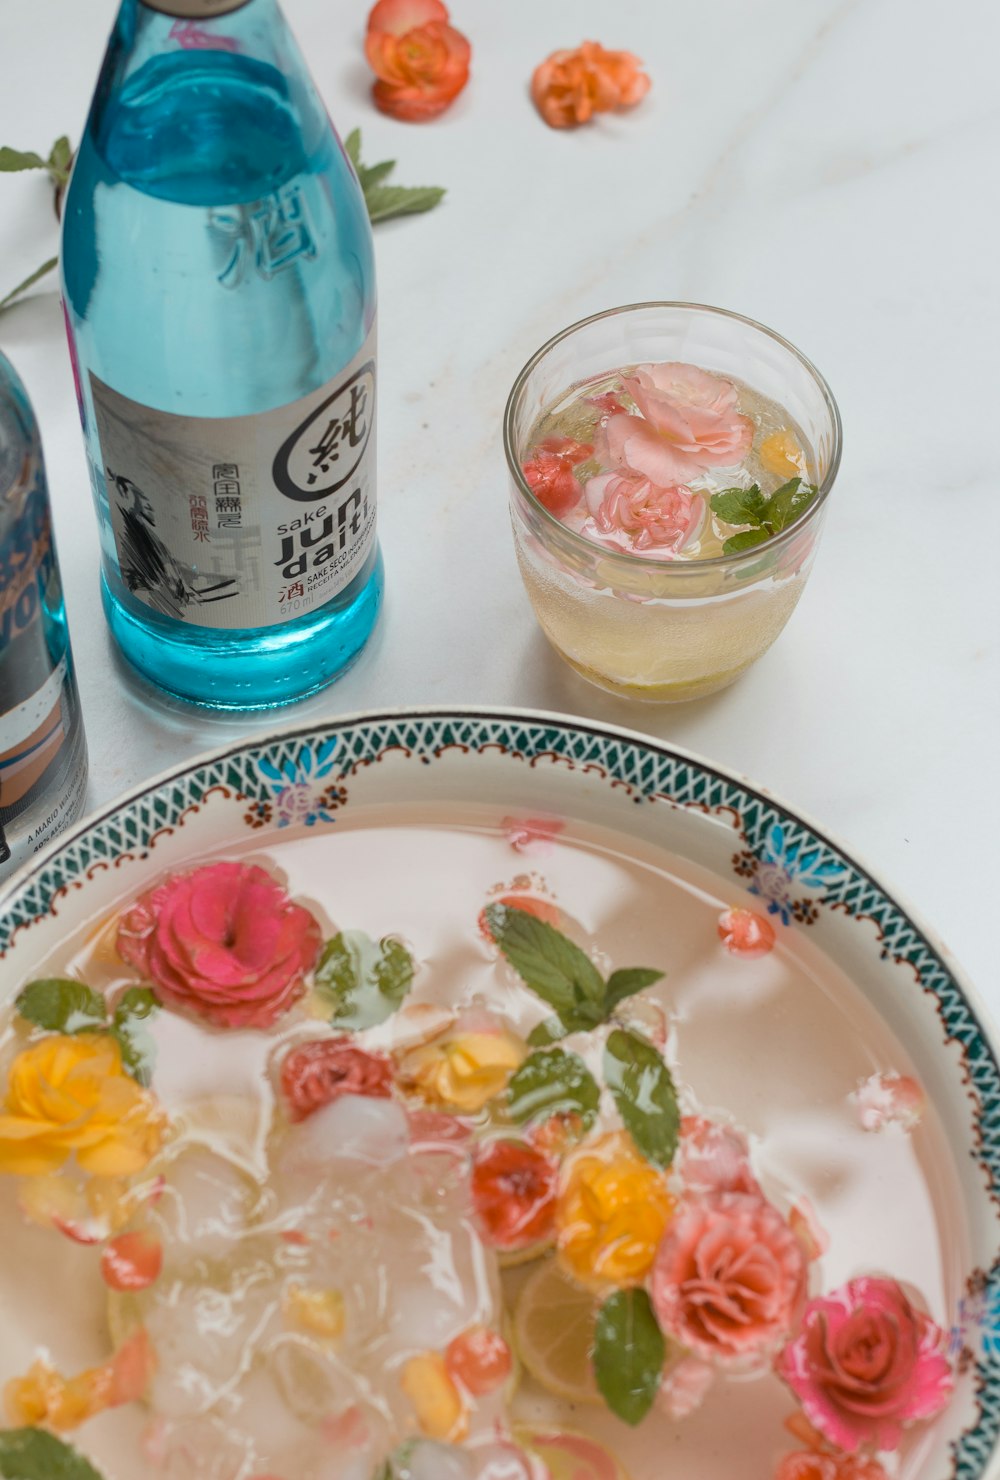 a plate with flowers on it next to a bottle of alcohol